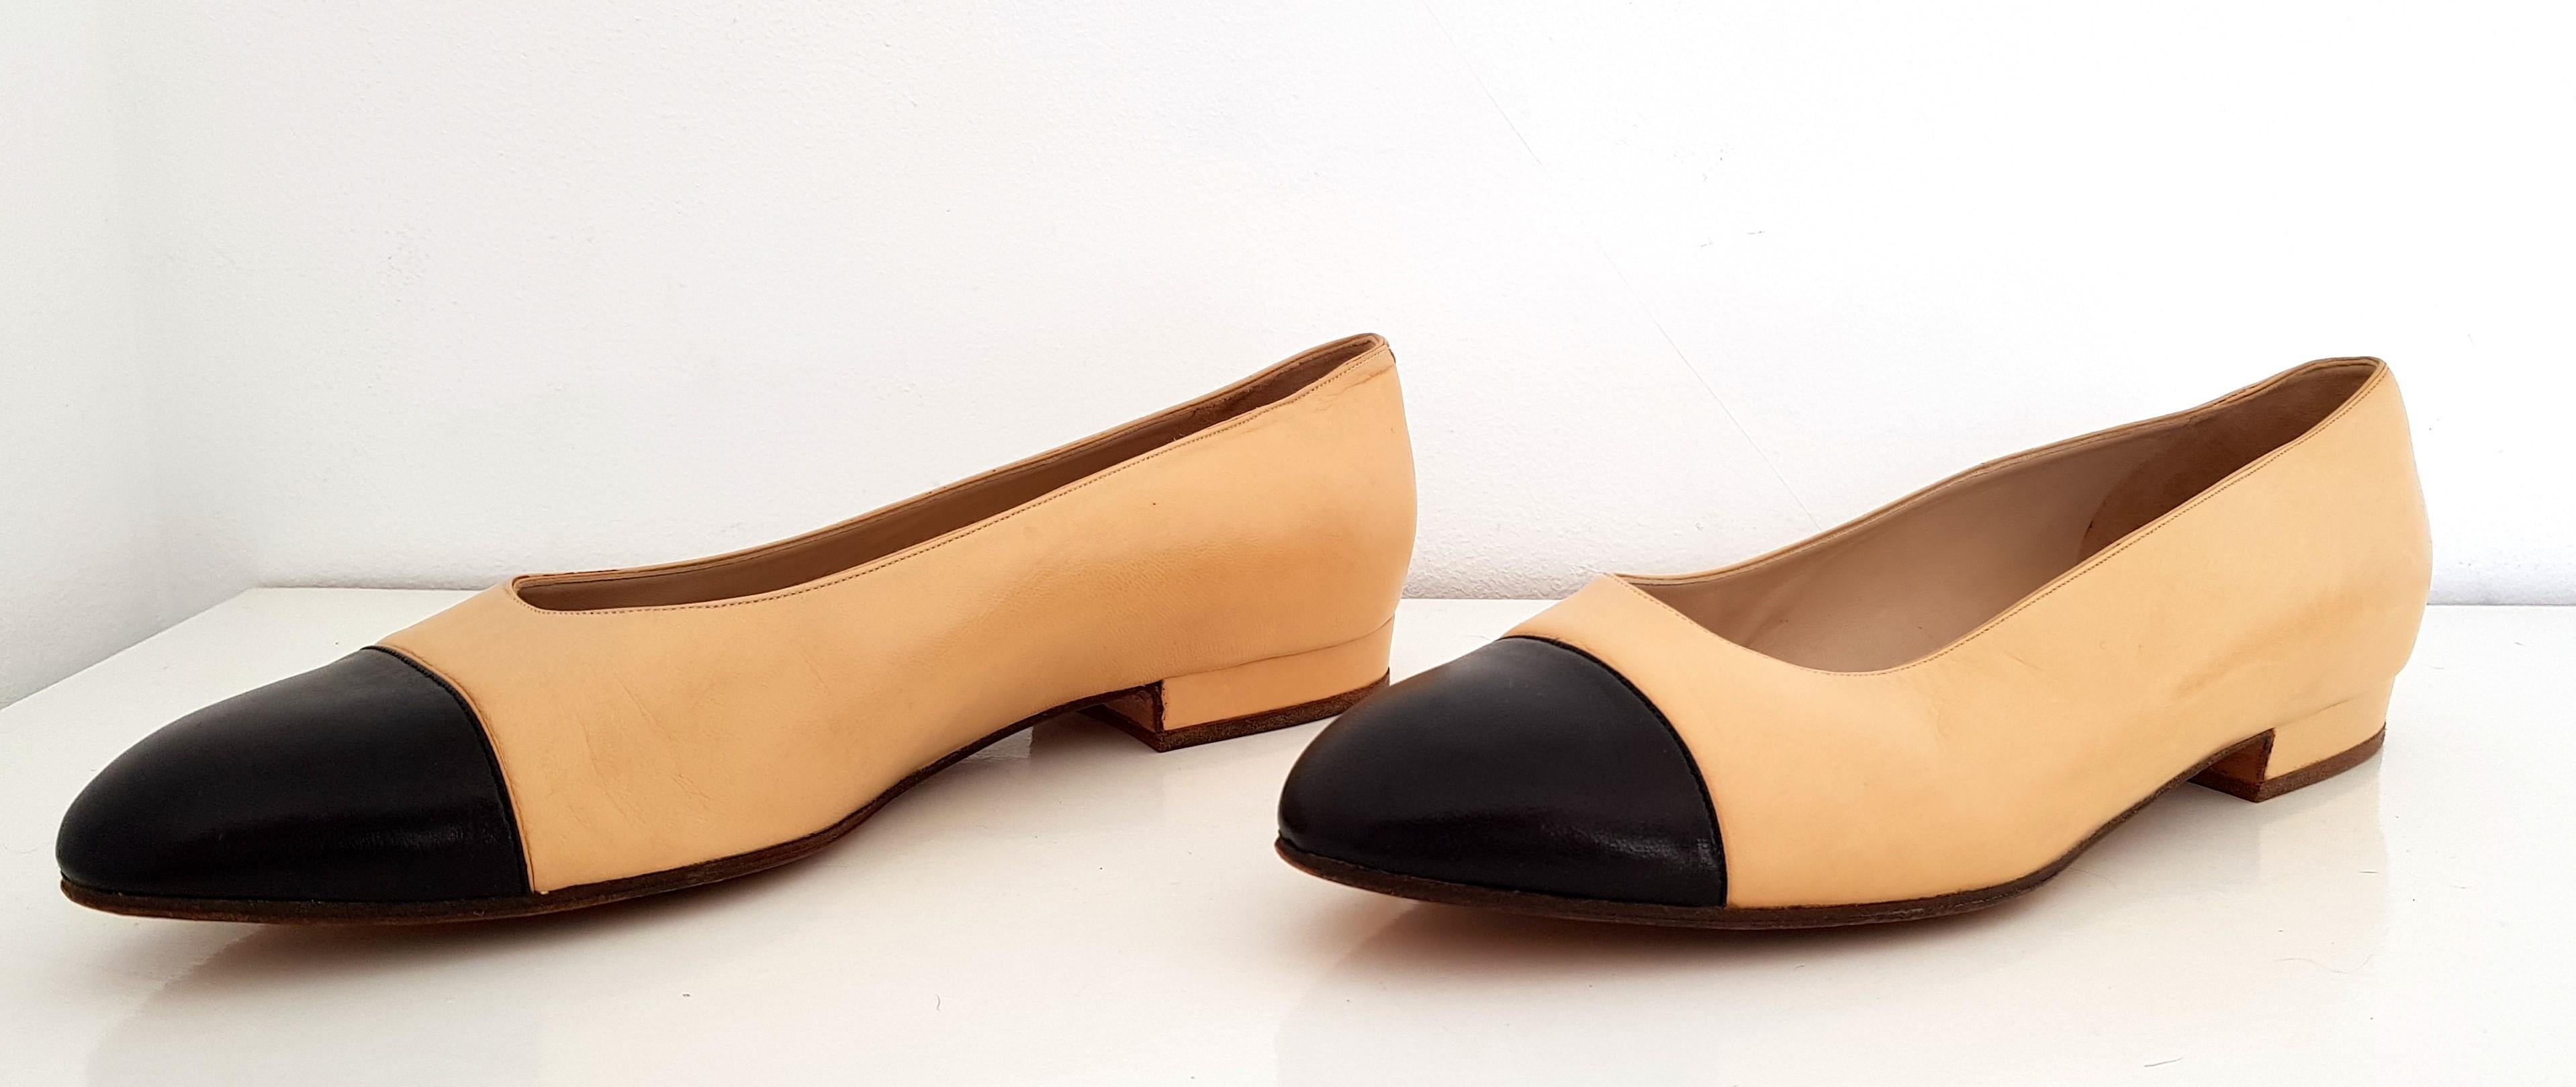 Chanel Ballerina Ballet Flats
Colors: Bicolor Beige and Black
Materials: Leather
Very good conditions with light signs of use in the interior sole.
Length: 26,5 cm
Width: 8,5 cm
Heel height: 1,5 cm
Made in France
Size 40 (EU)